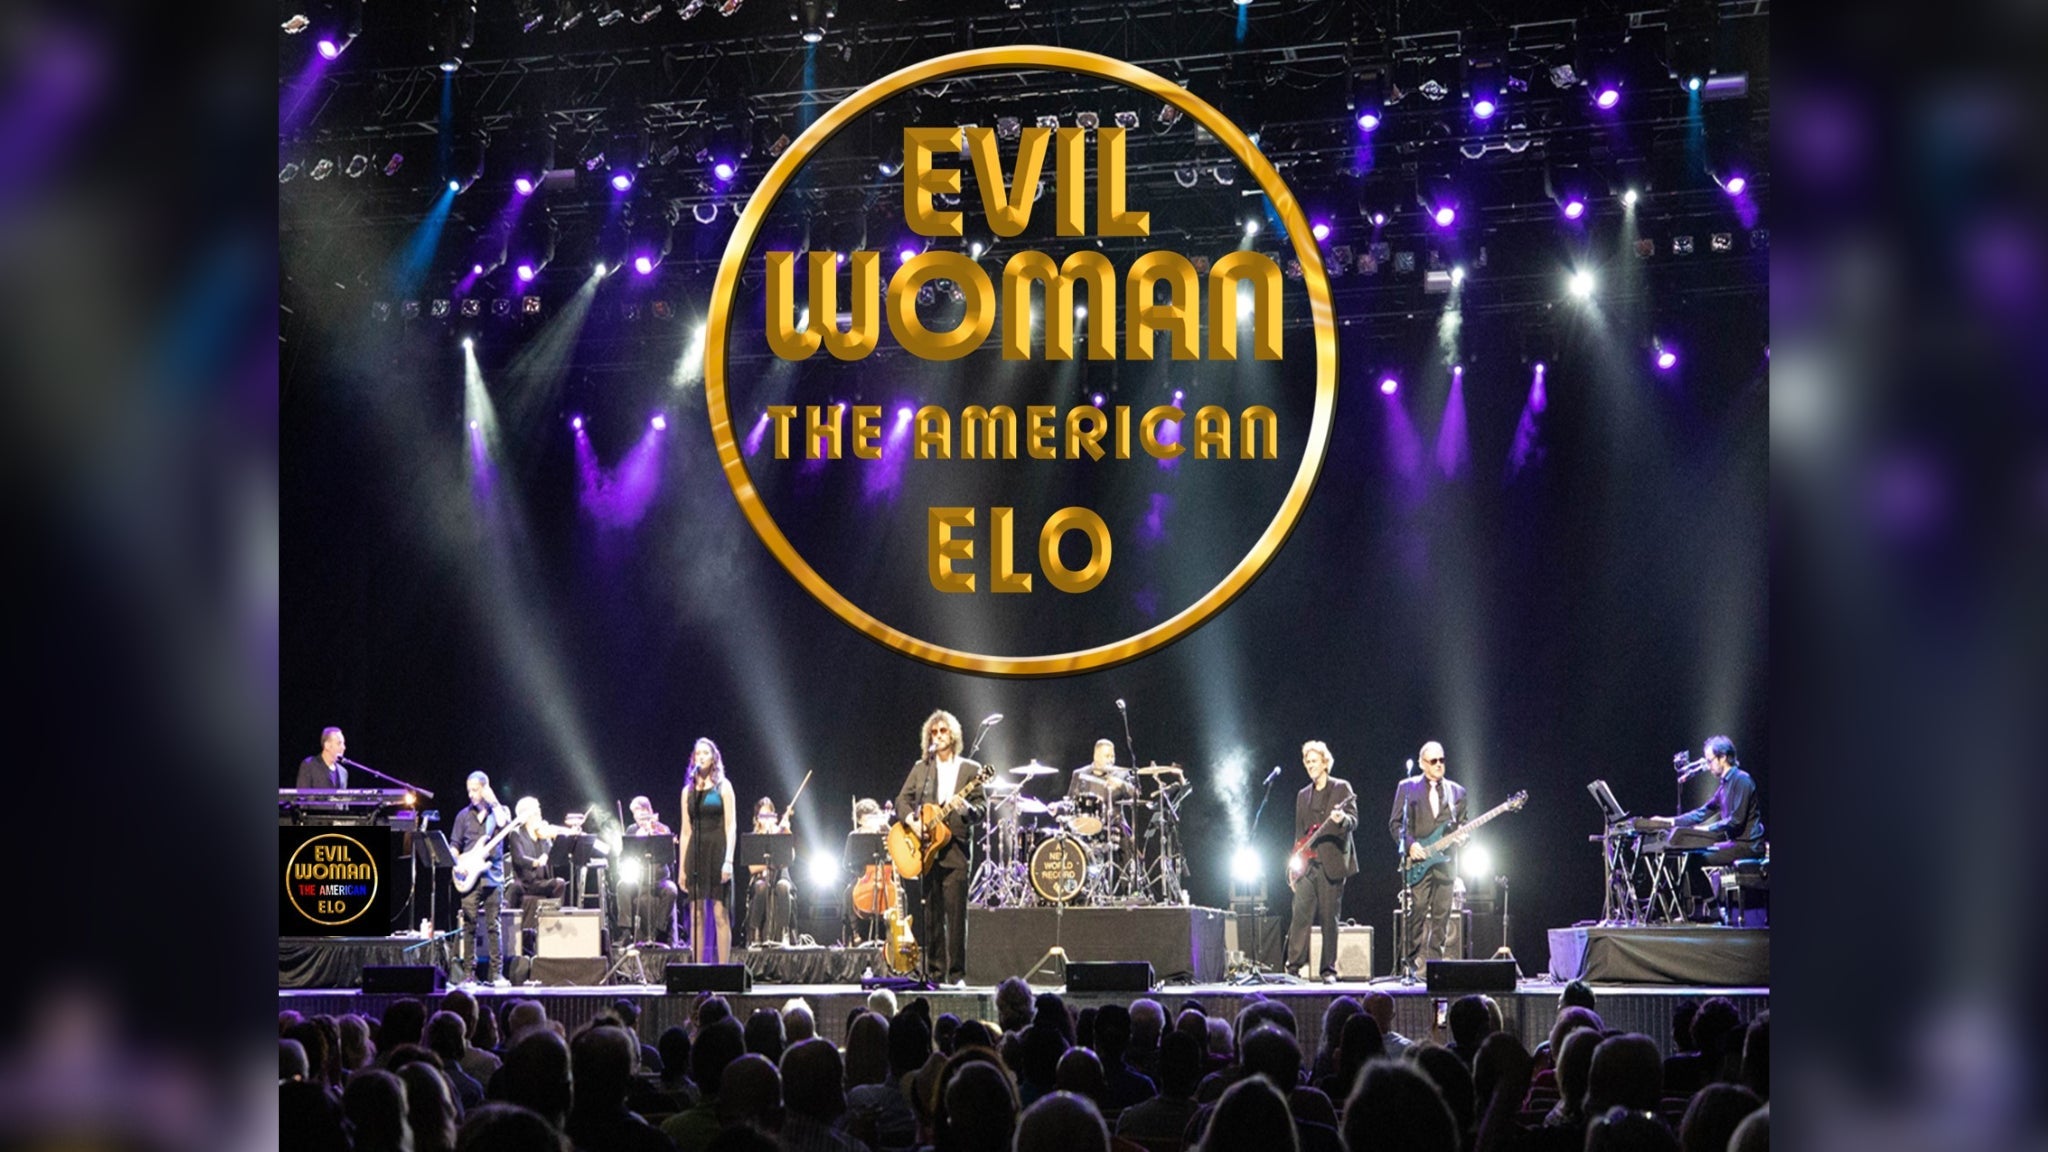 An Evening With Evil Woman – The American ELO at Elevation 27 – Virginia Beach, VA